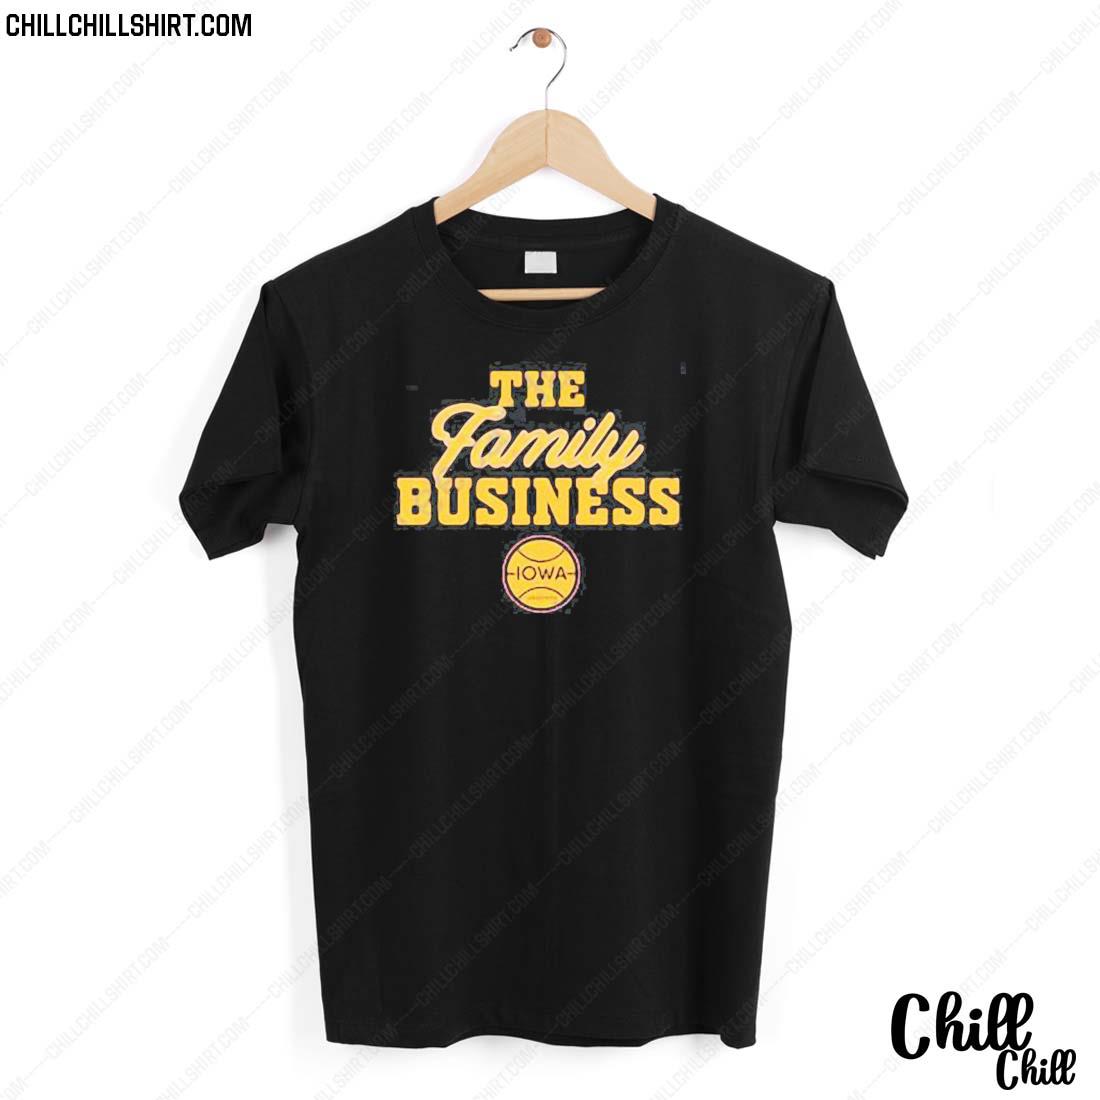 Official the Family Business Iowa T-shirt